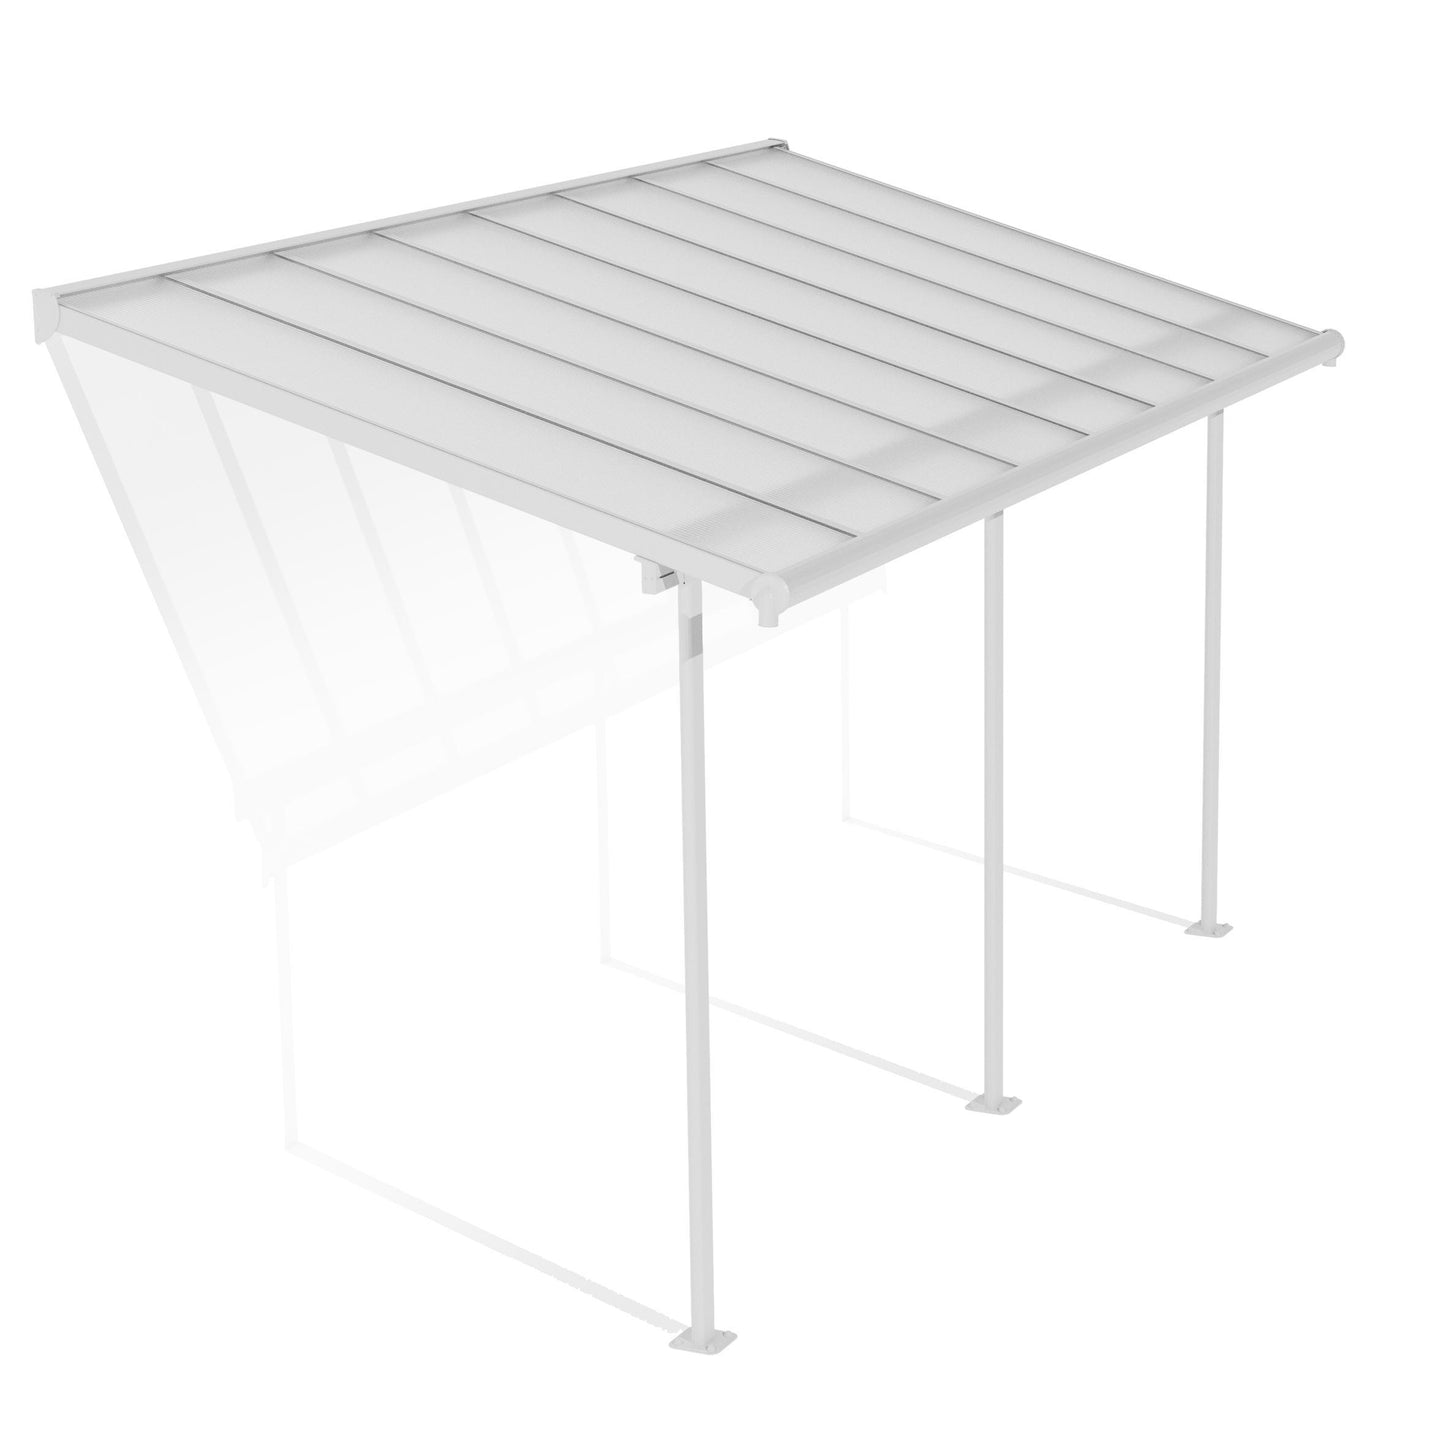 Canopia by Palram 2.3 x 4.6 Sierra Patio Cover - White